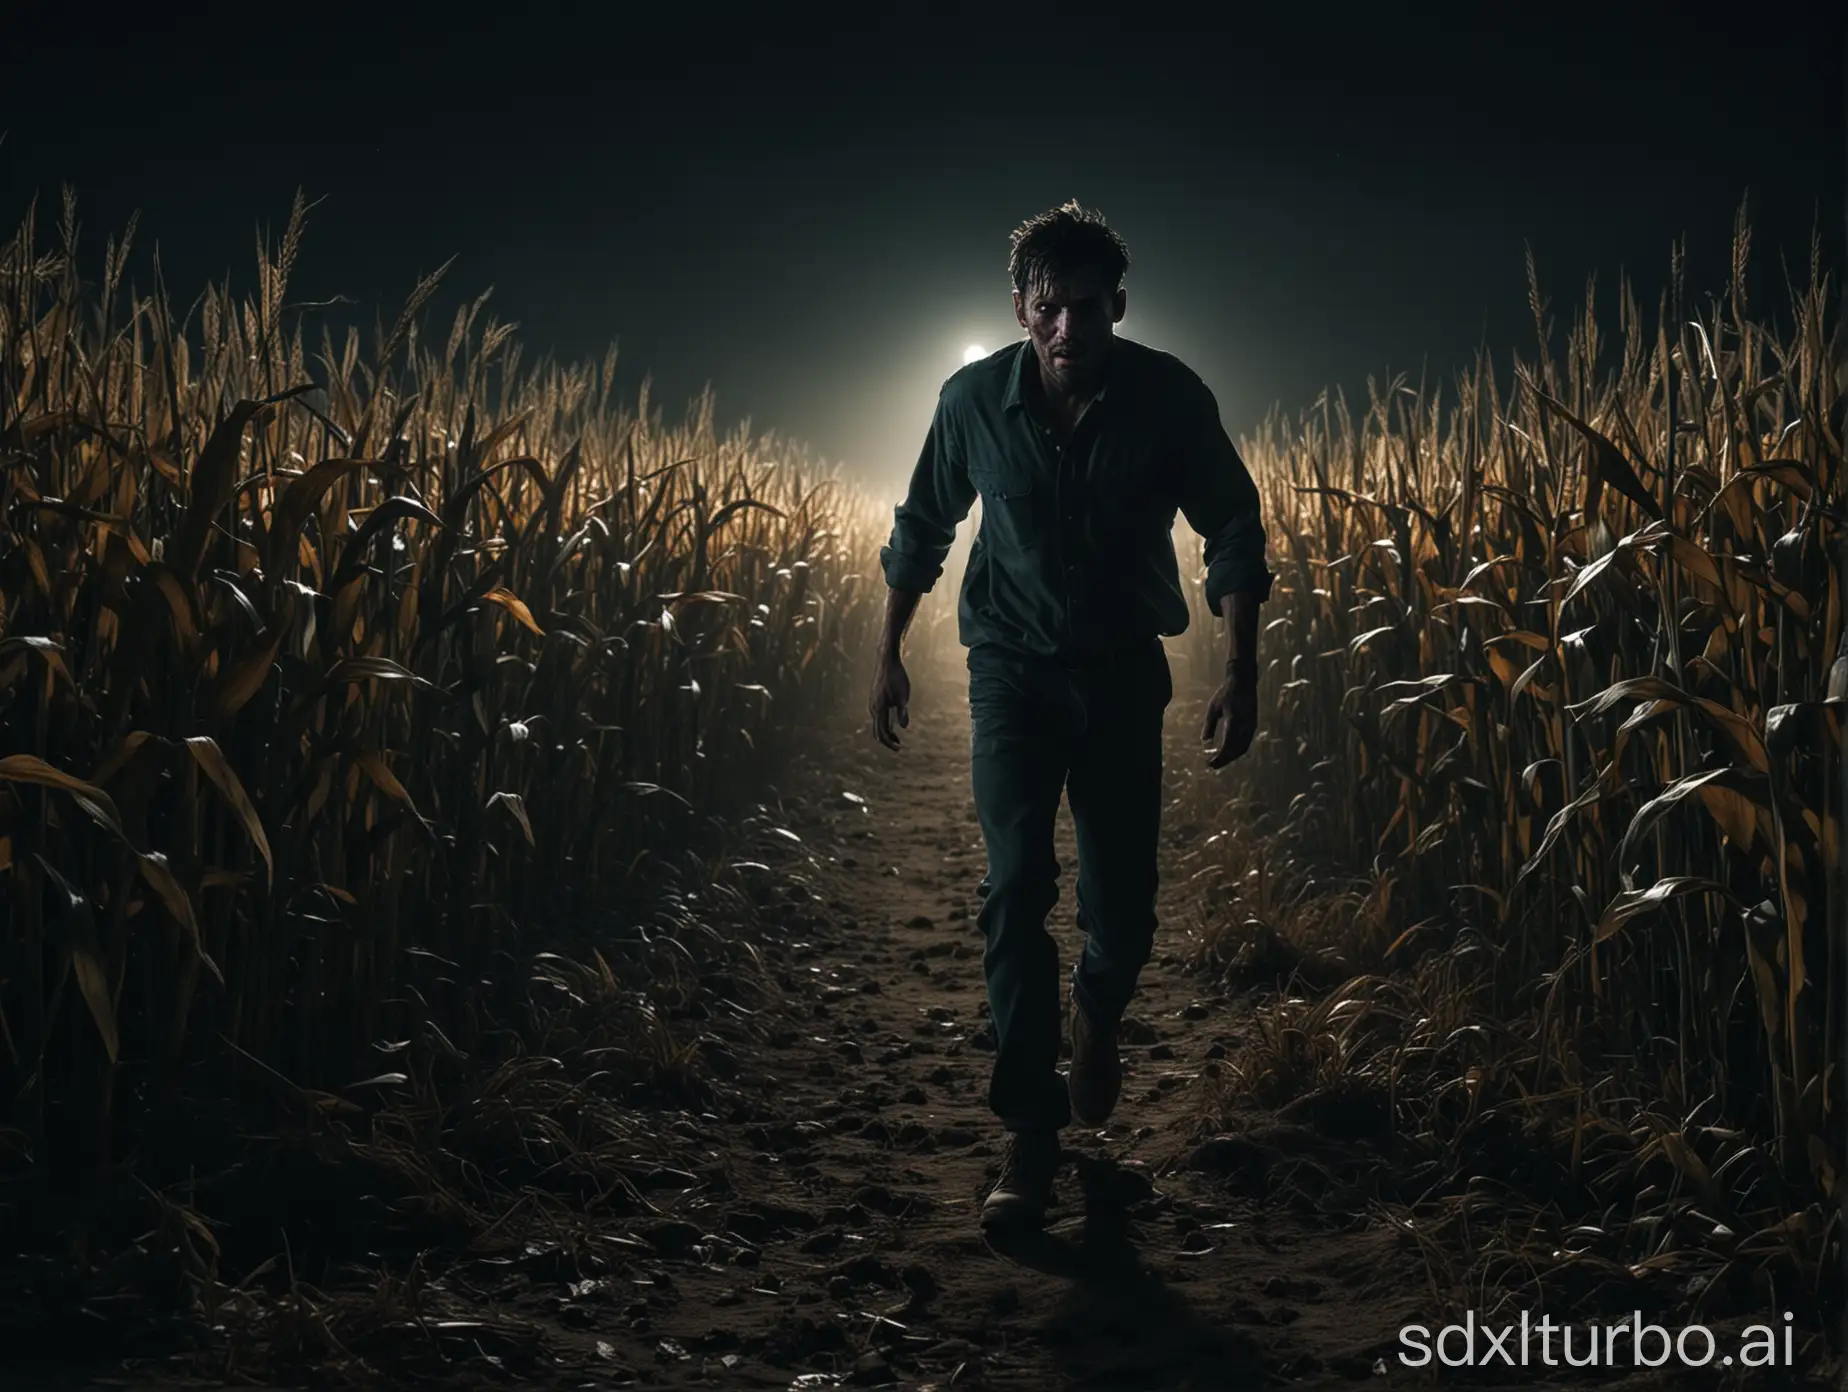 Create a square, 1:1 aspect ratio, high definition, image of a true scary cornfield story. The image must be photorealistic, scary, show a worried man running at night in a cornfield, chased, dimly lit, scared man, terrified man, wide eyes, afraid man, alone, only person, running away, escaping, high action, thrilling, vivid colors, night time, very vibrant, cinematic, catchy, must pop and catch attention, wide shot. Not a monster, no monstrous faces, no blood, no gore, no horror.